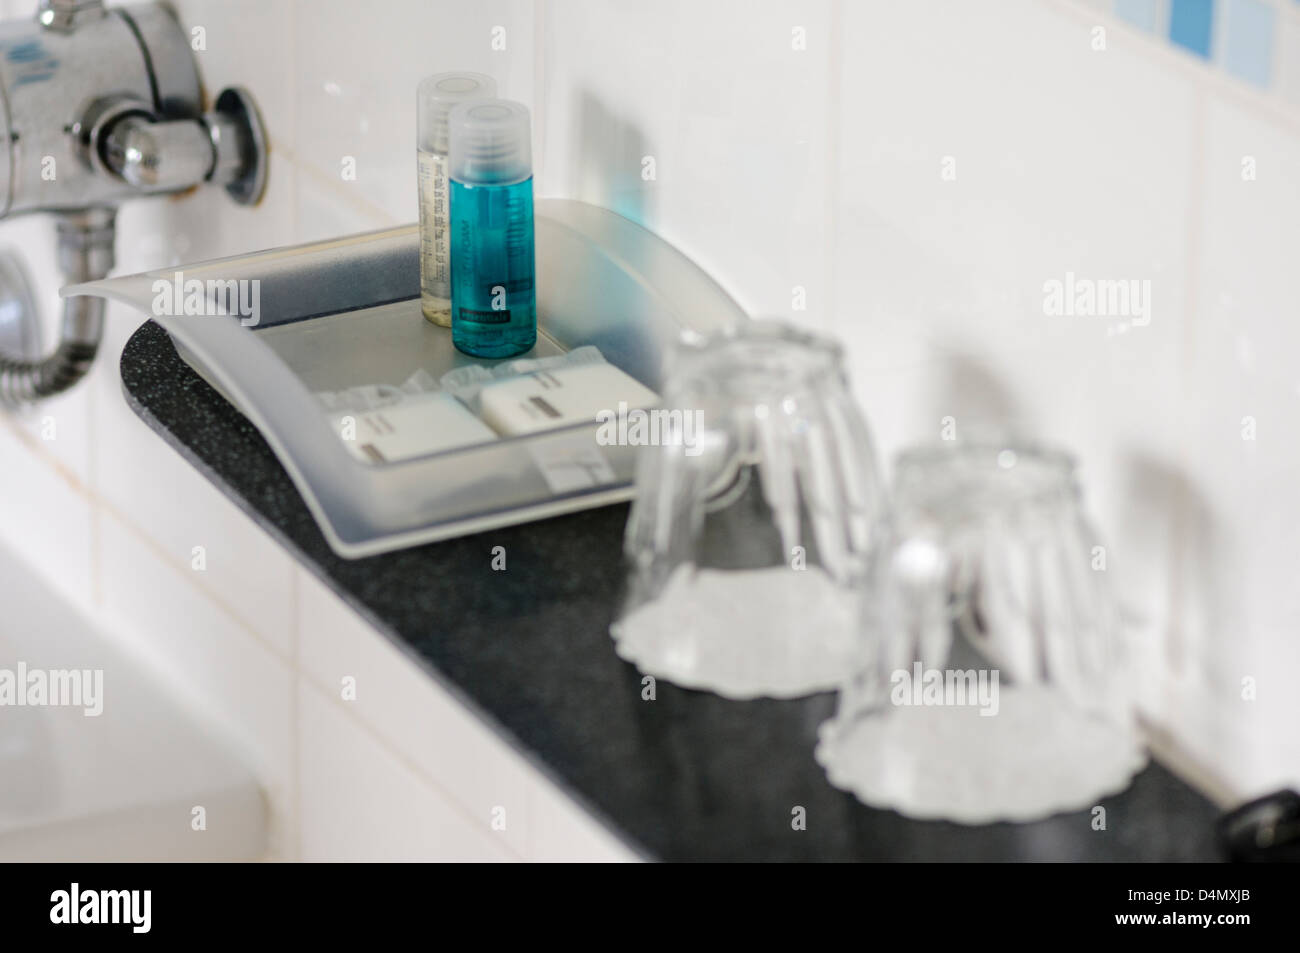 Toiletries and classes in the bathroom of a hotel bedroom. Stock Photo